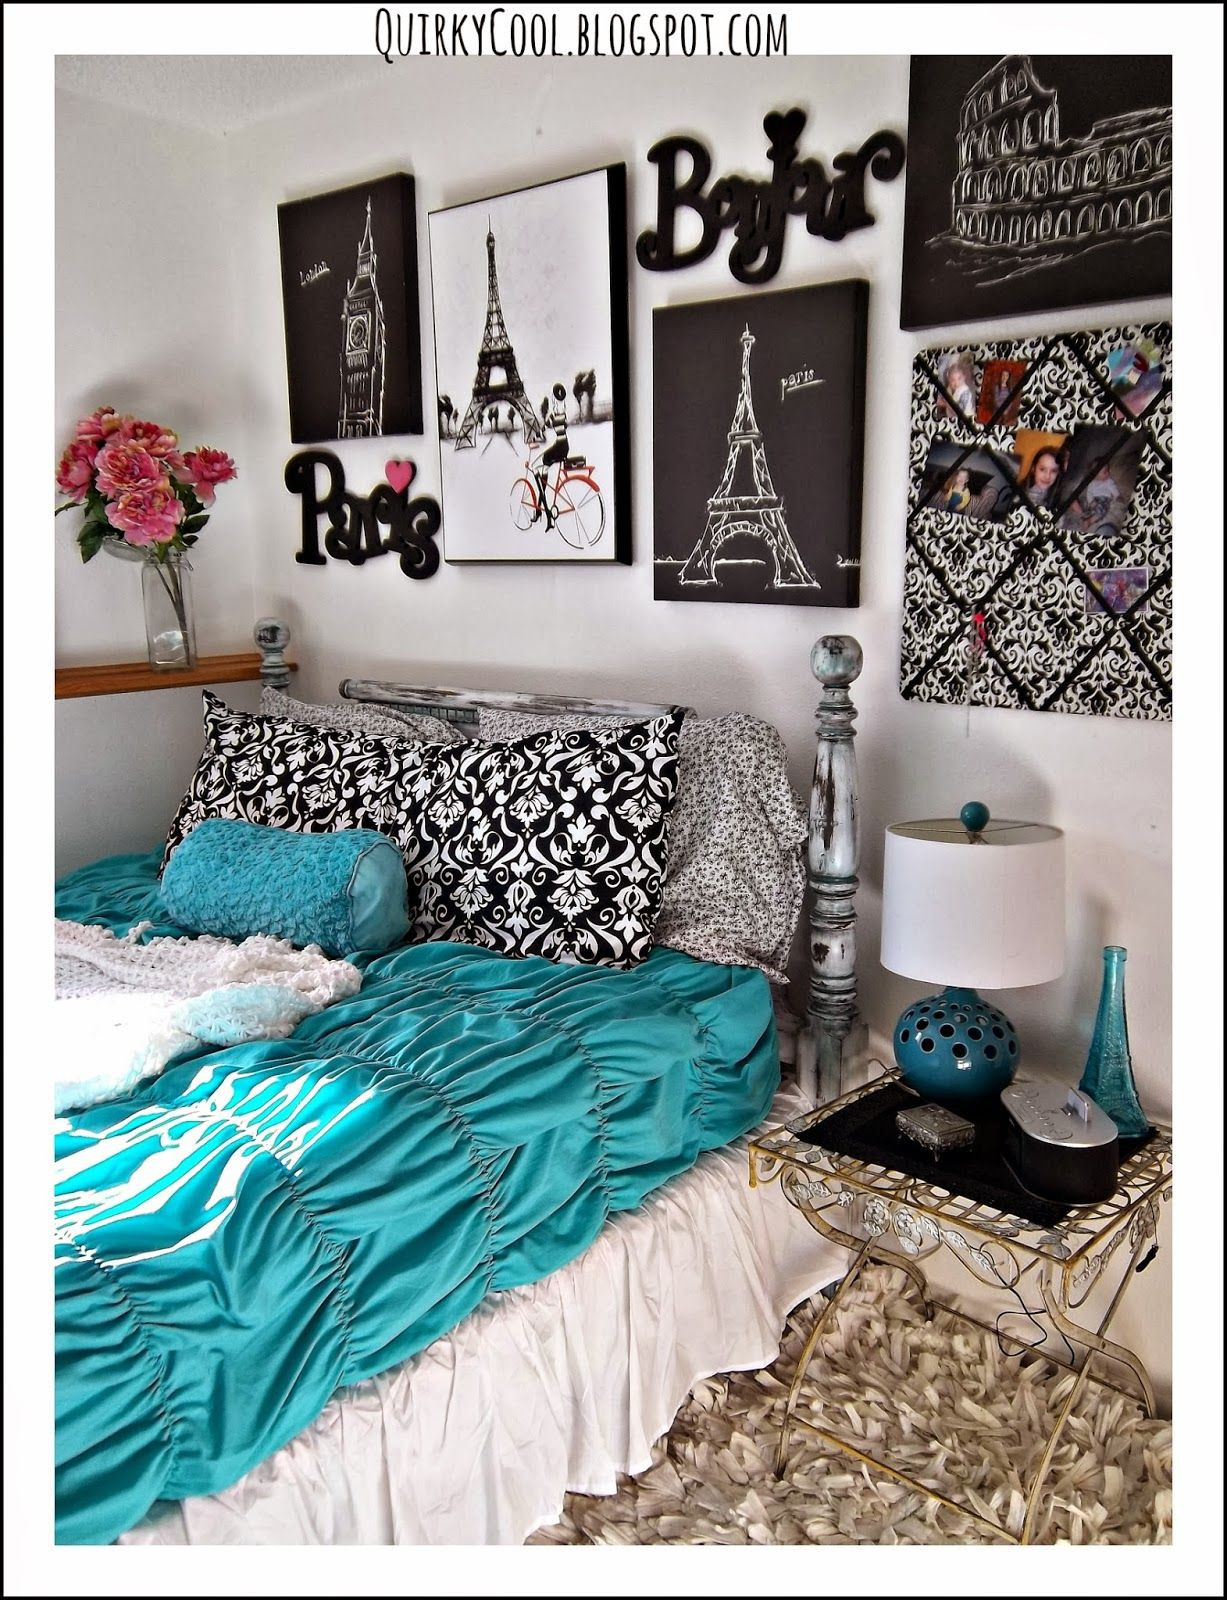 Paris Themed Girl Bedroom
 Quirky Cool A Parisian Chic Room